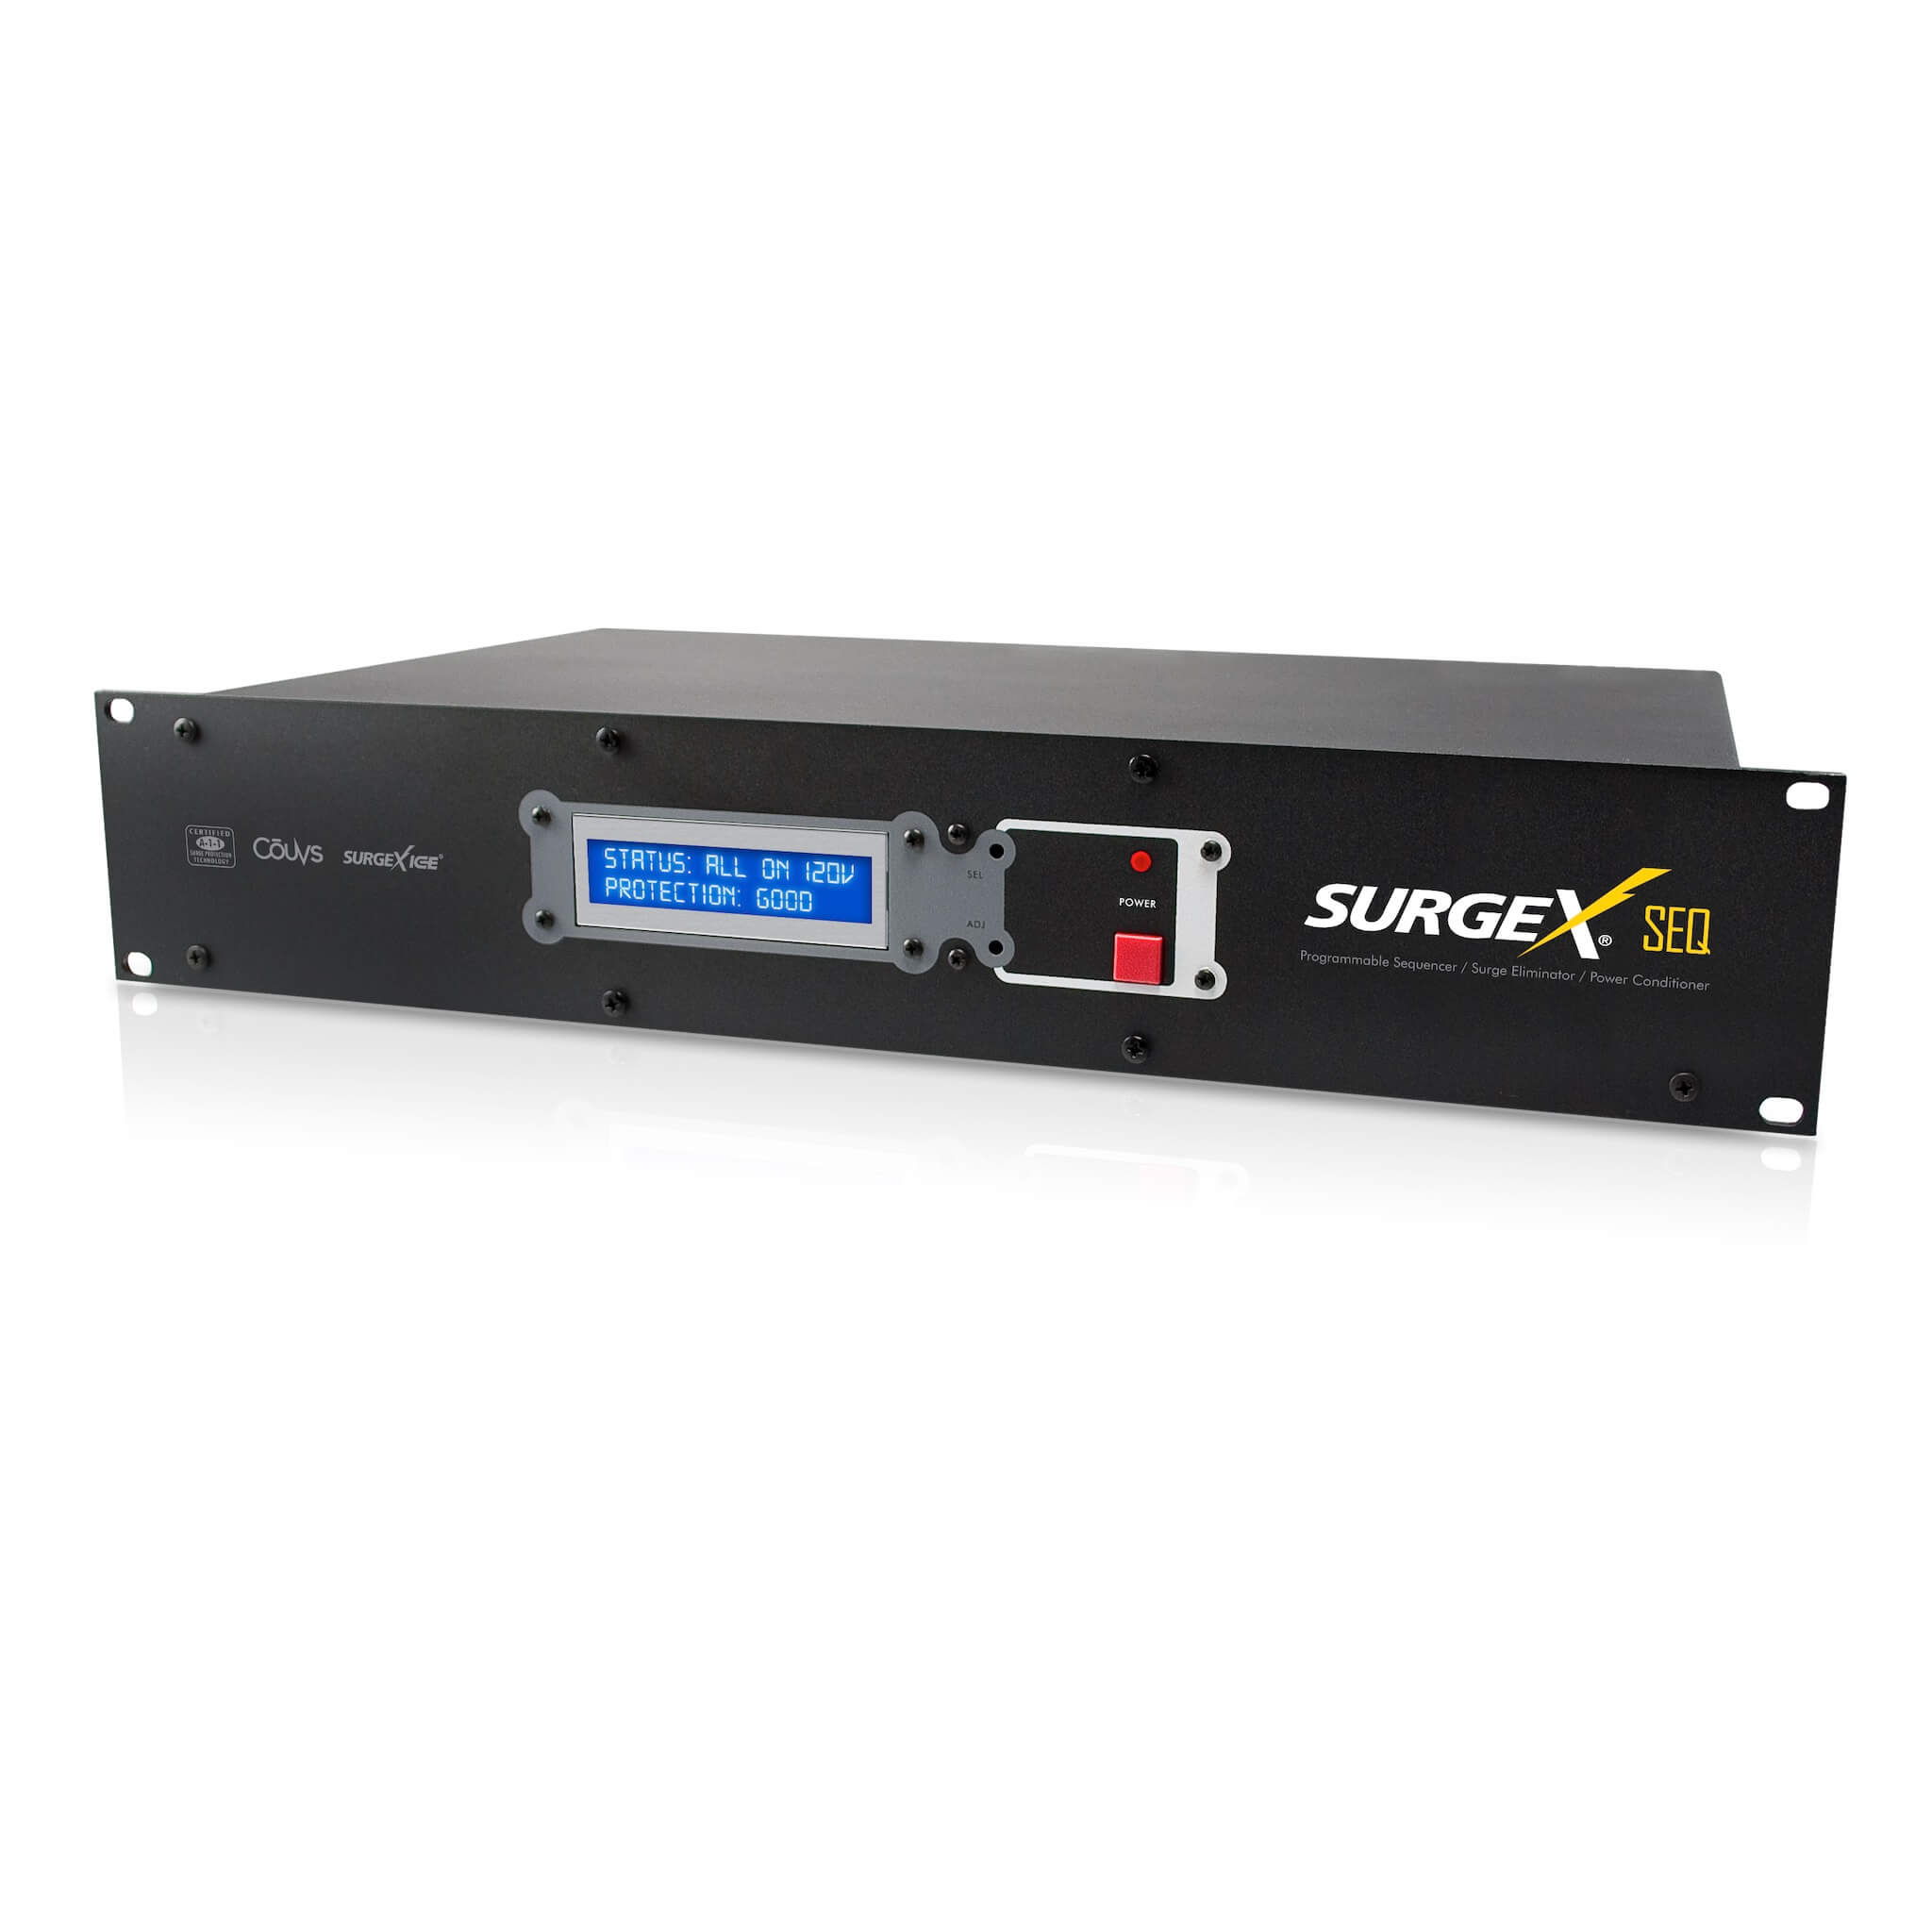 SurgeX SEQ - Sequencing Surge Eliminator and Power Conditioner, angled front view